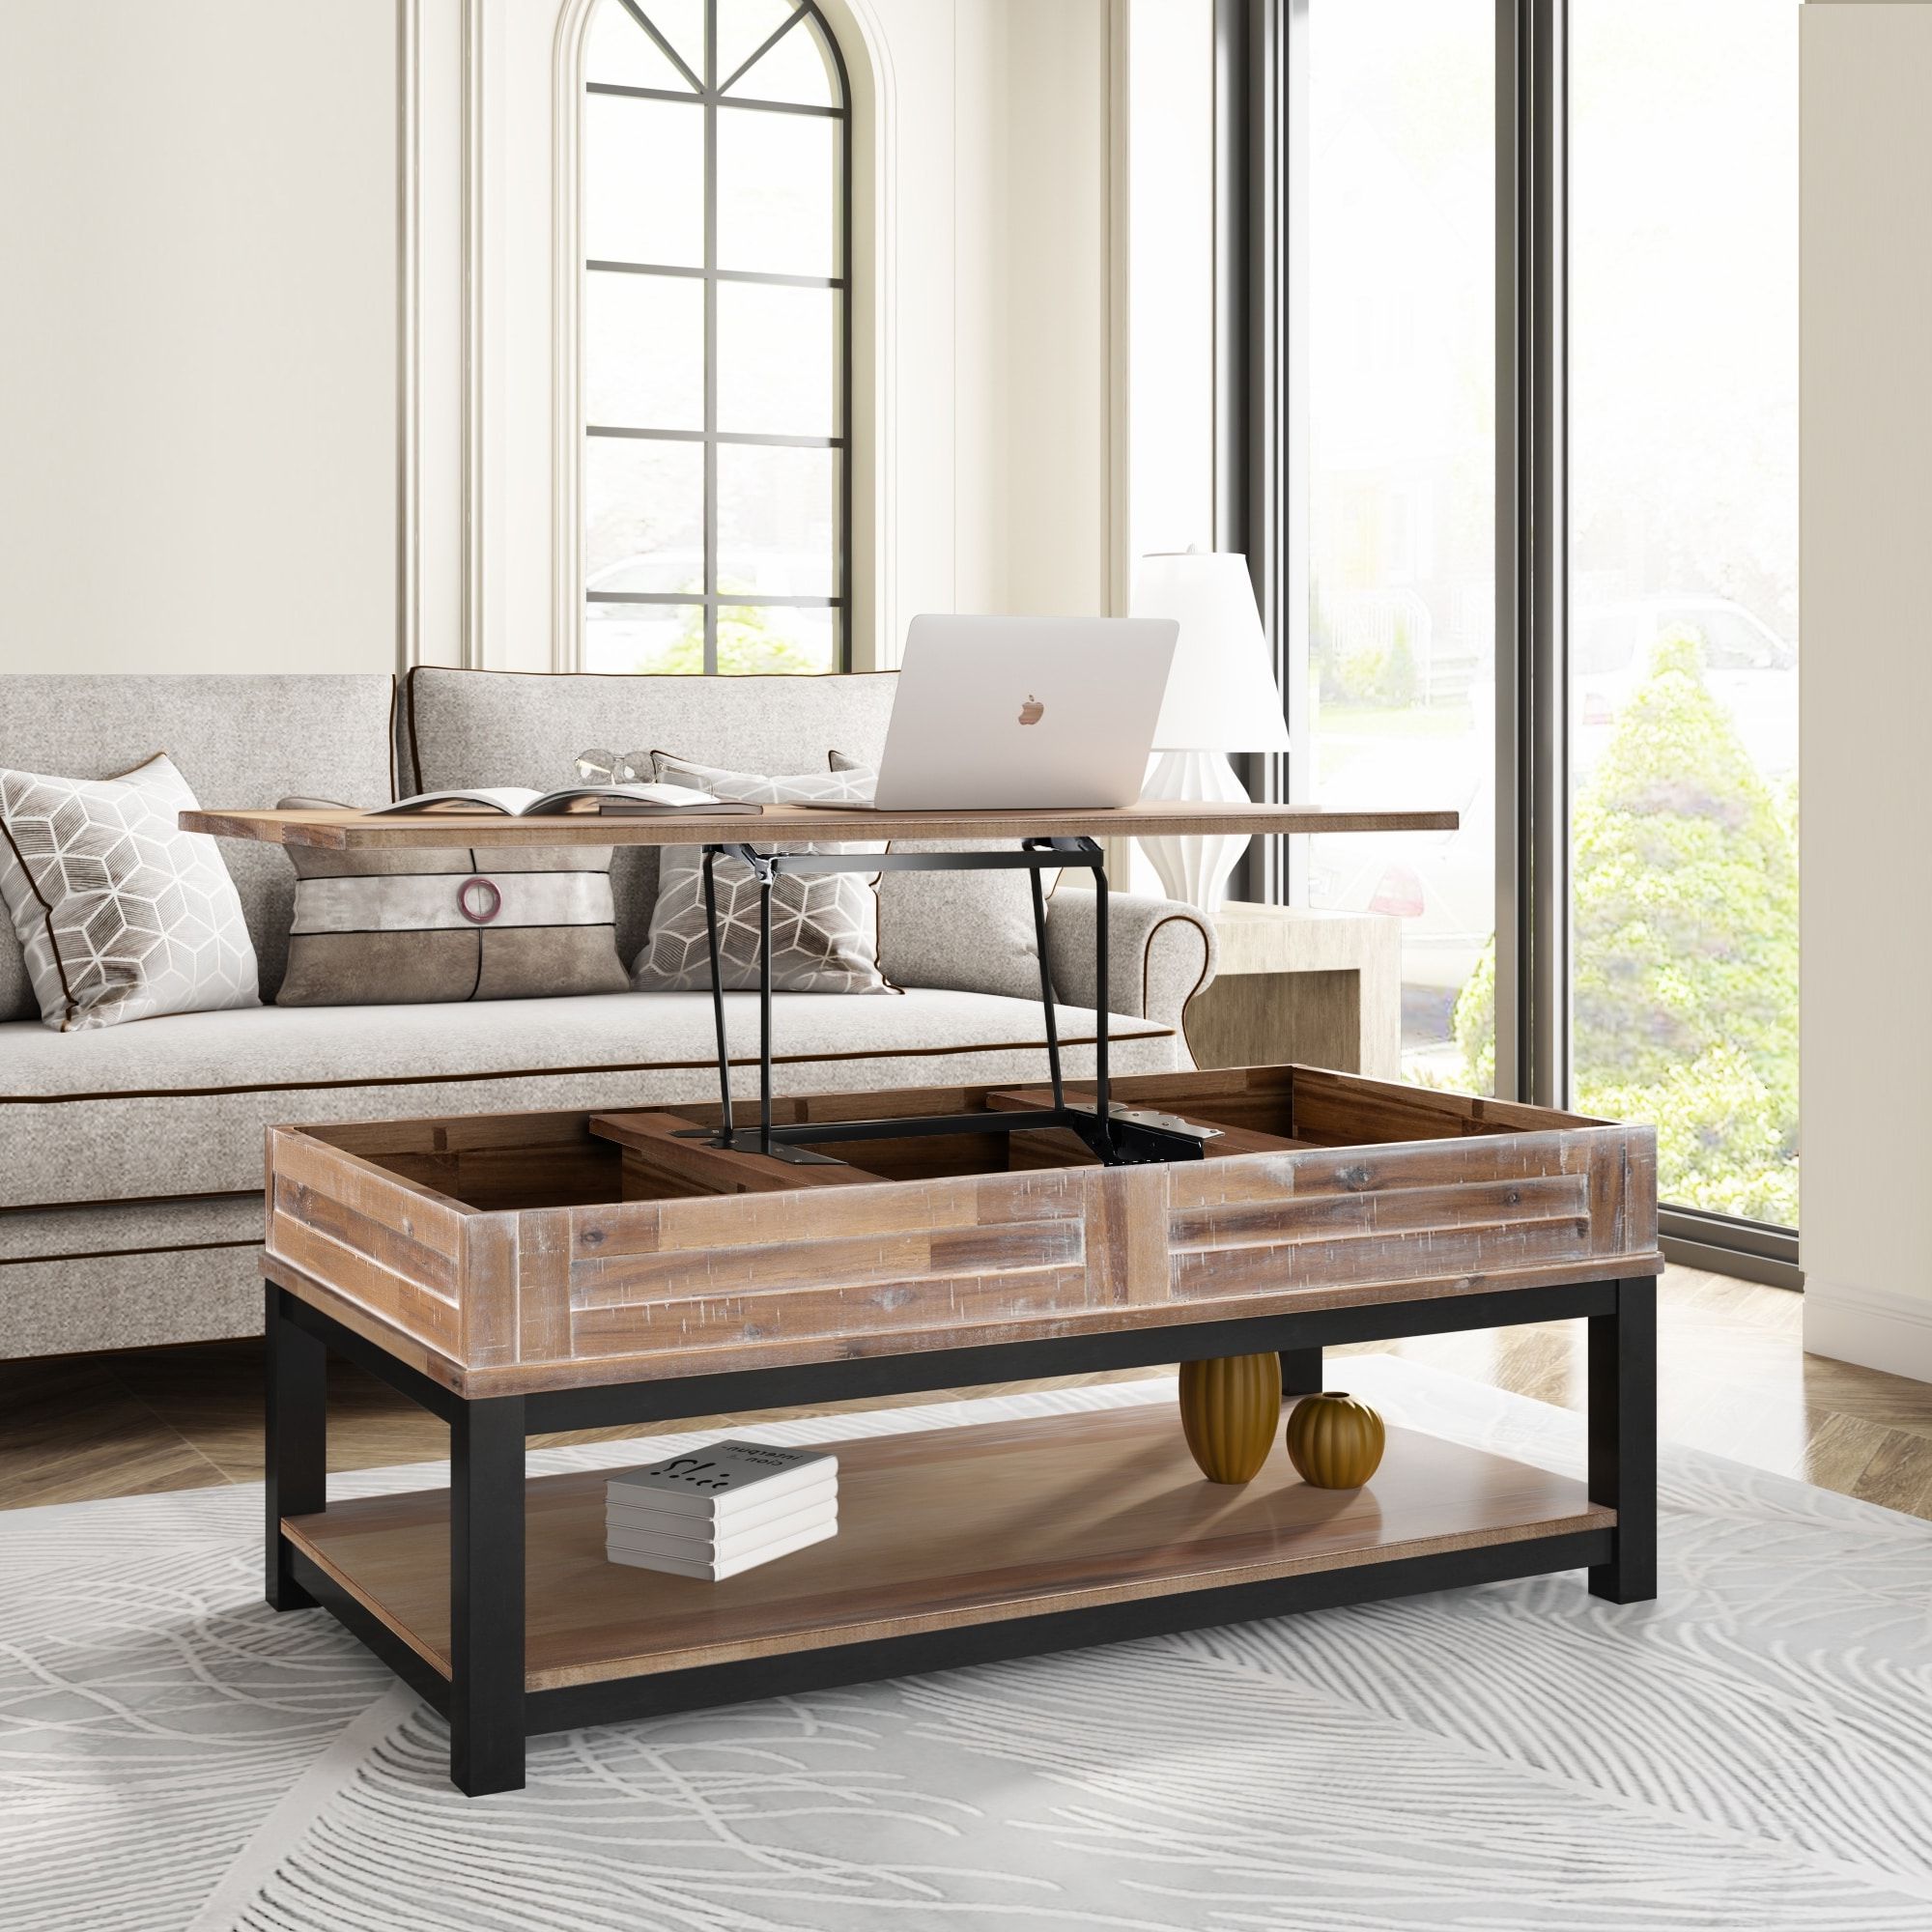 Most Popular Lift Top Coffee Tables With Shelves Throughout Wooden Lift Top Coffee Table With Inner Storage Space And Shelf – Bed Bath  & Beyond –  (View 7 of 10)